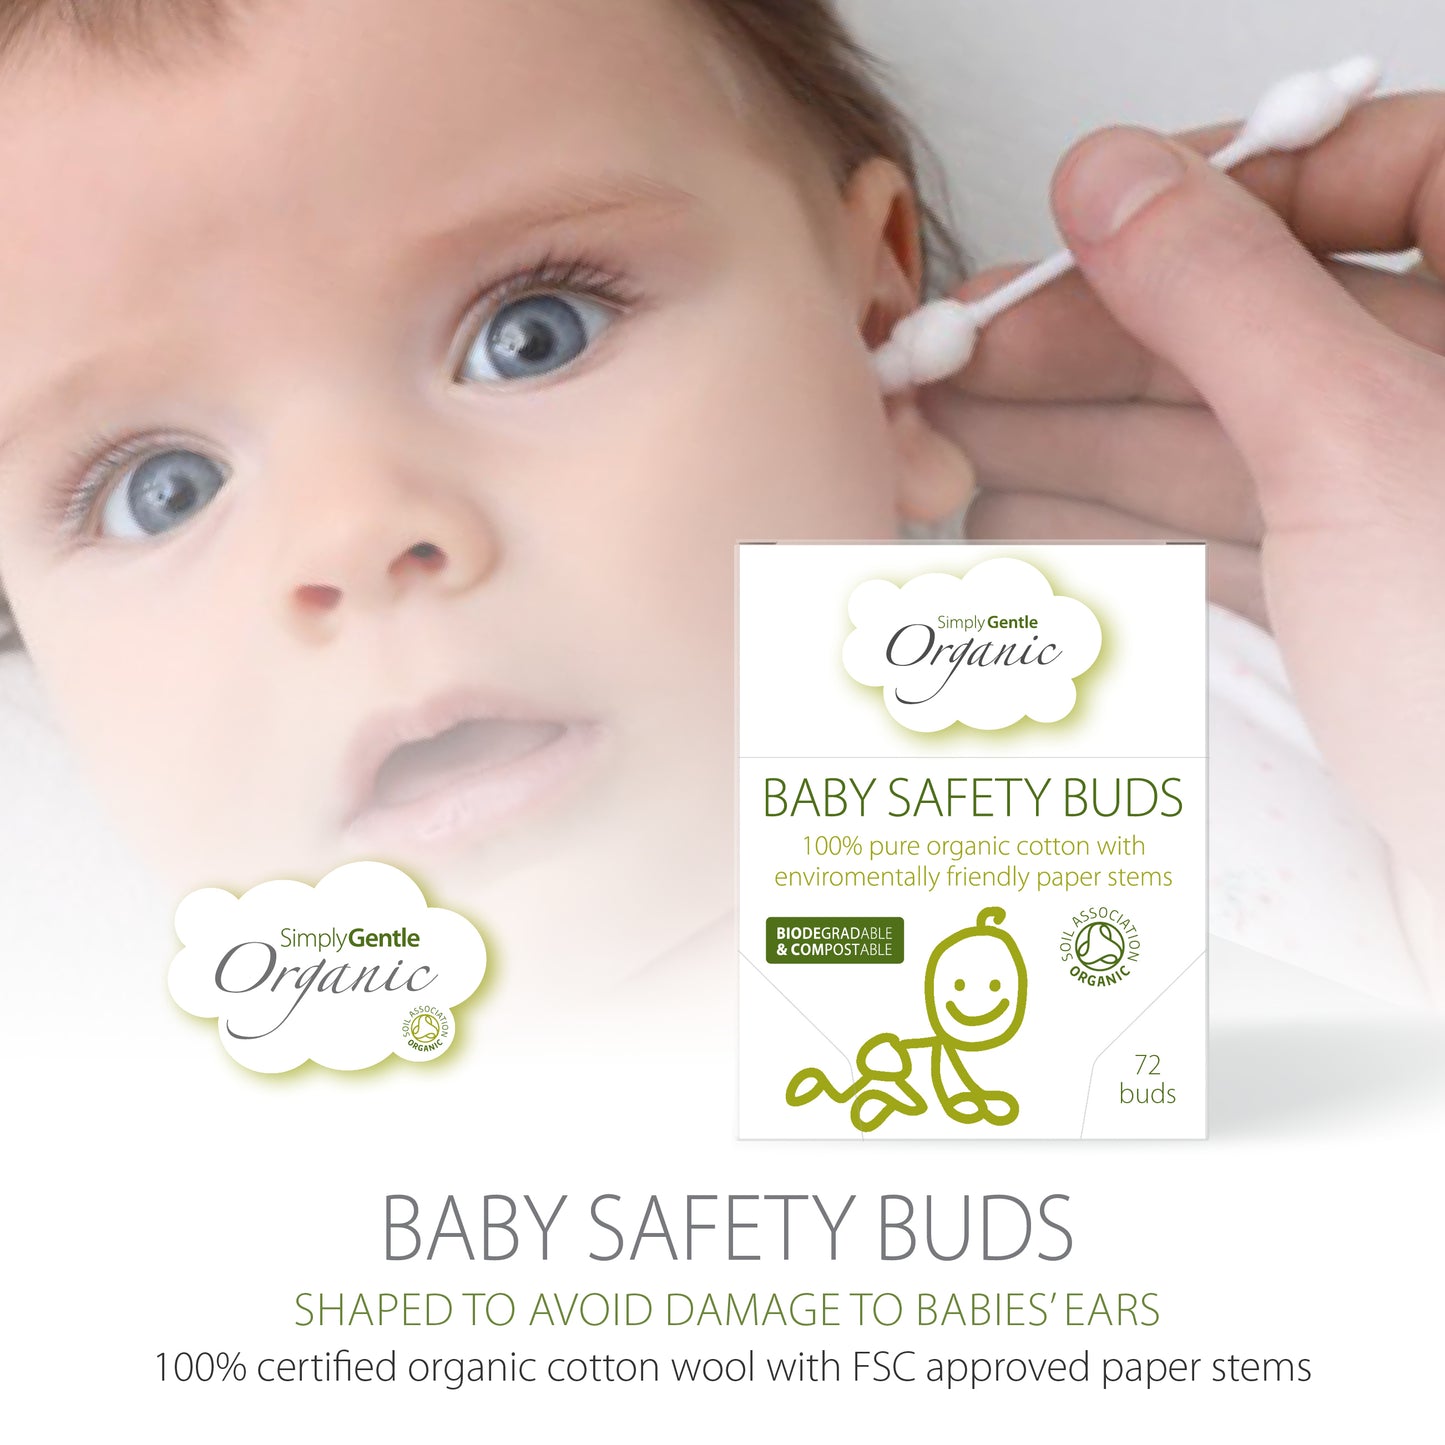 Simply Gentle Baby Safety Buds are made with 100% cotton tips making them soft and gentle on baby’s delicate skin. Specially designed with the extra large safety tips making them perfect for cleaning delicate areas, around your baby’s eyes, outer ears and navel. Also ideal for make-up, beauty and skincare needs. Composition: 100% certified organic cotton wool with FSC approved paper stems.